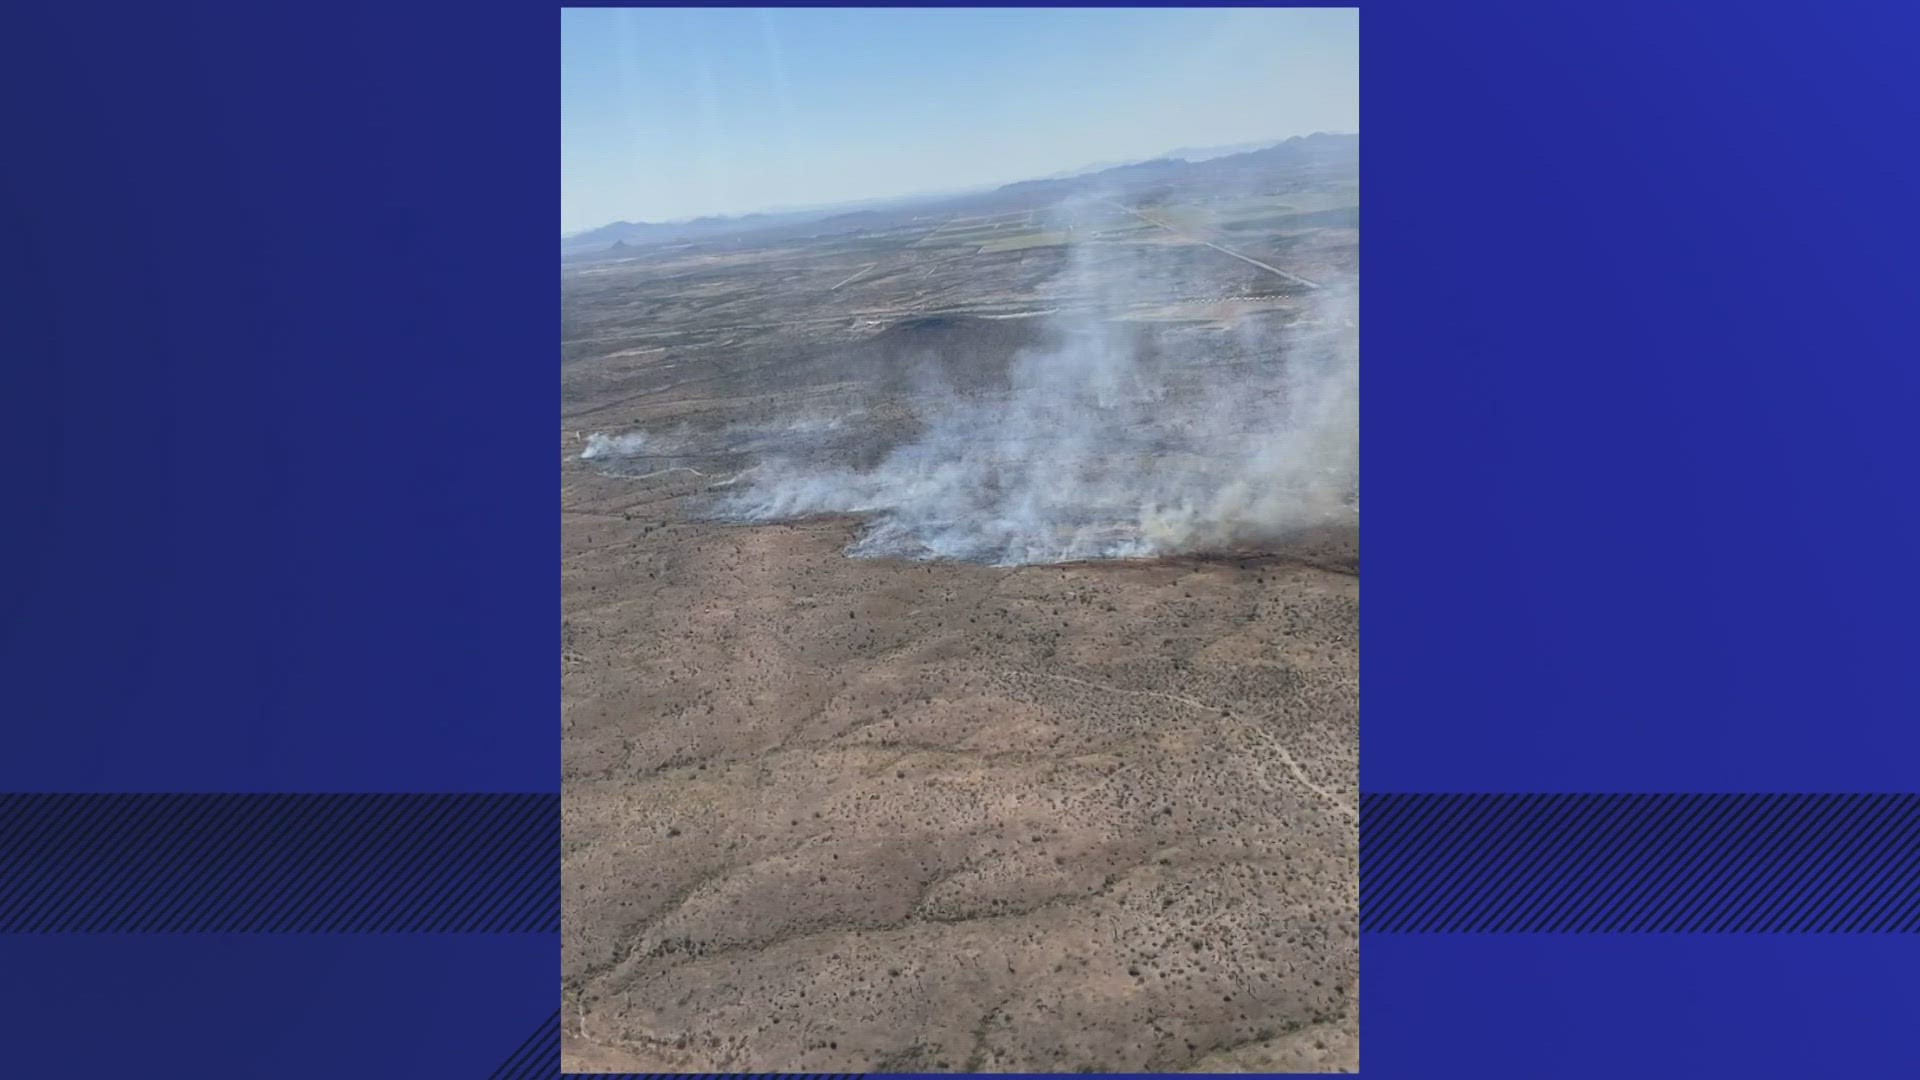 The Range Fire is burning just north of Florence, Arizona. Watch the video for the latest details and the safety issue preventing crews from fighting the flames.